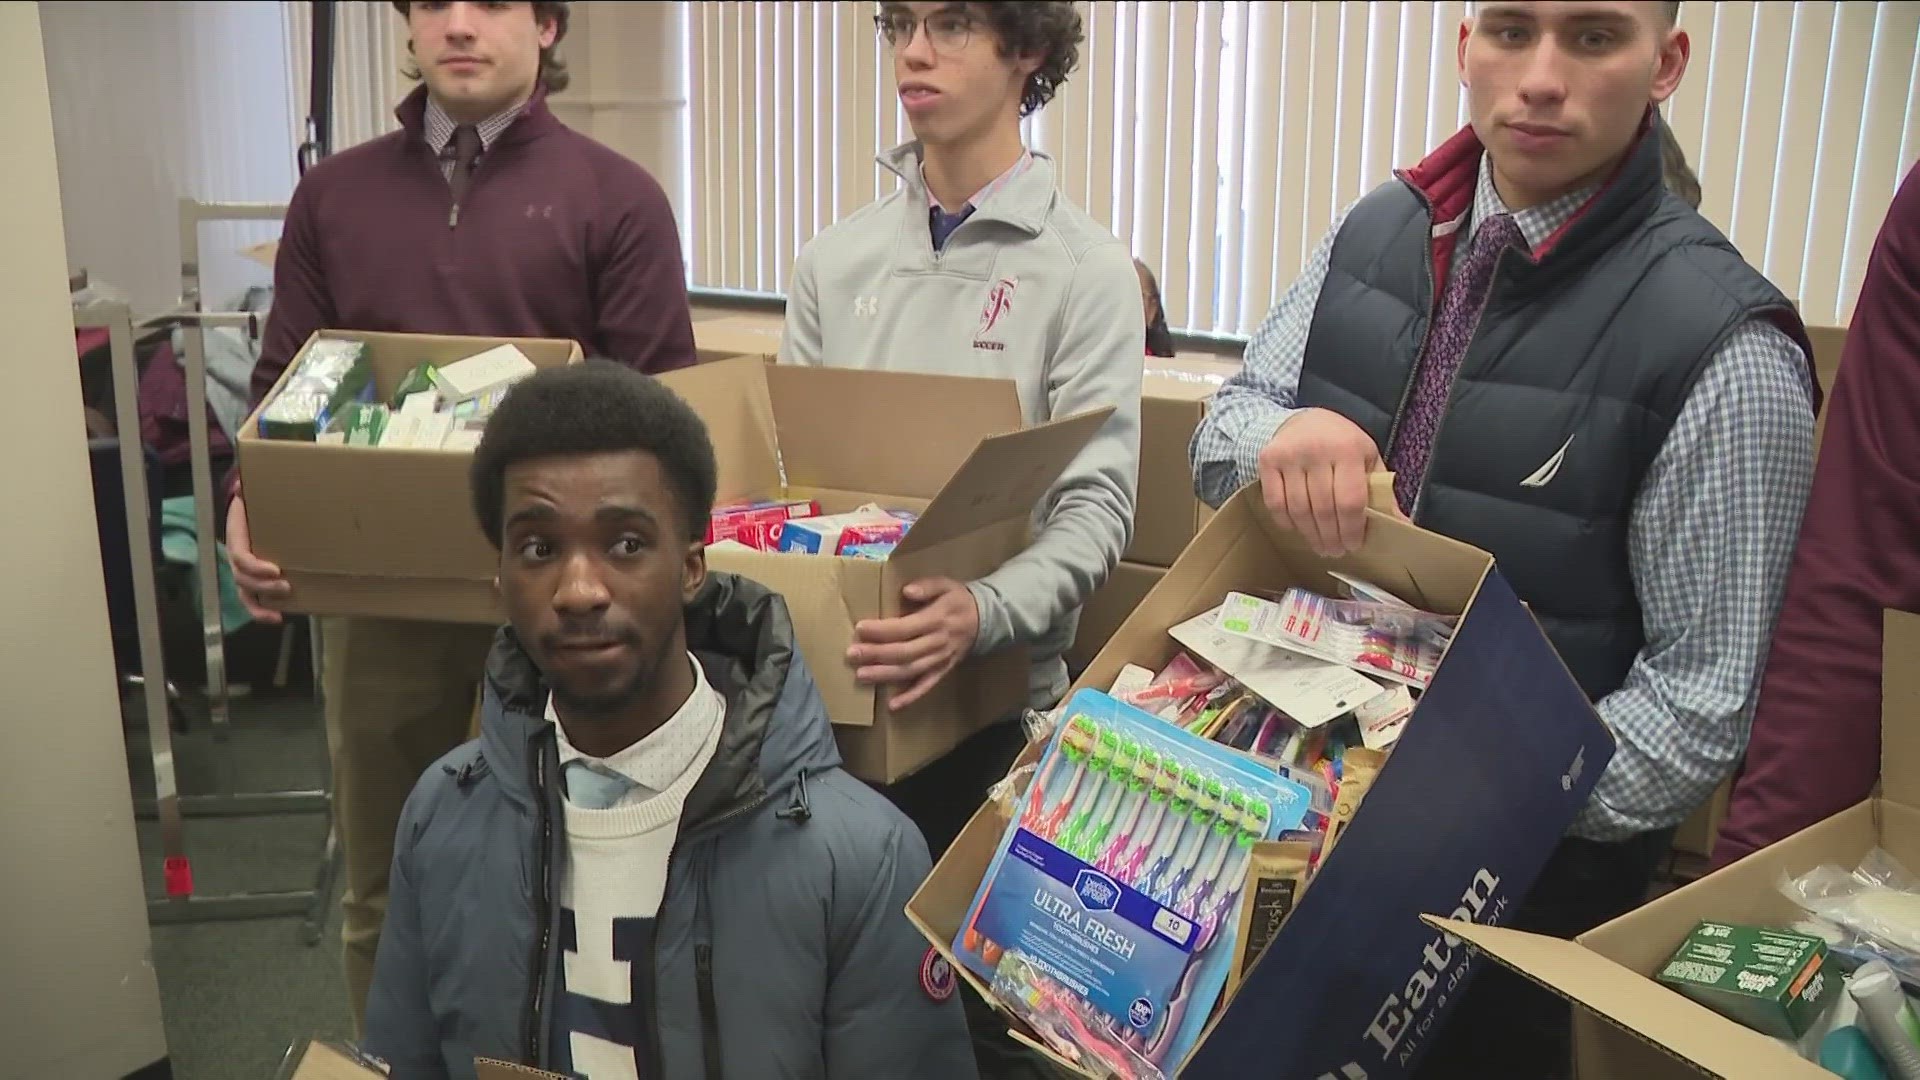 STUDENTS AT ST. JOSEPH COLLEGIATE INSTITUTE HAVE BEEN COLLECTING NEW AND UNOPENED ITEMS FOR THE DRIVE... AND TODAY THEY DROPPED OFF THEIR DONATIONS.